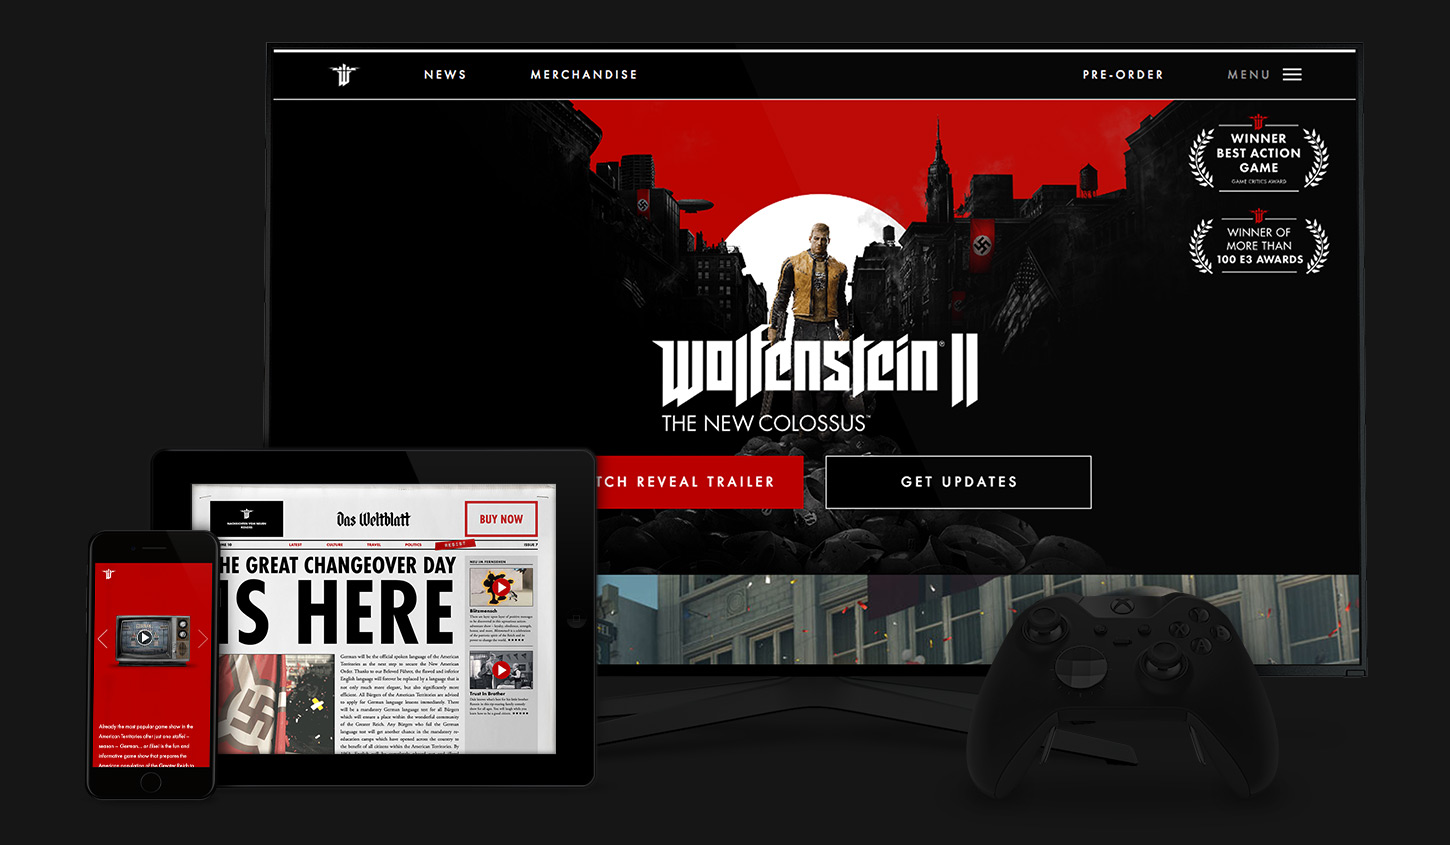 The Wolfenstein II website displayed on a phone, tablet, and television